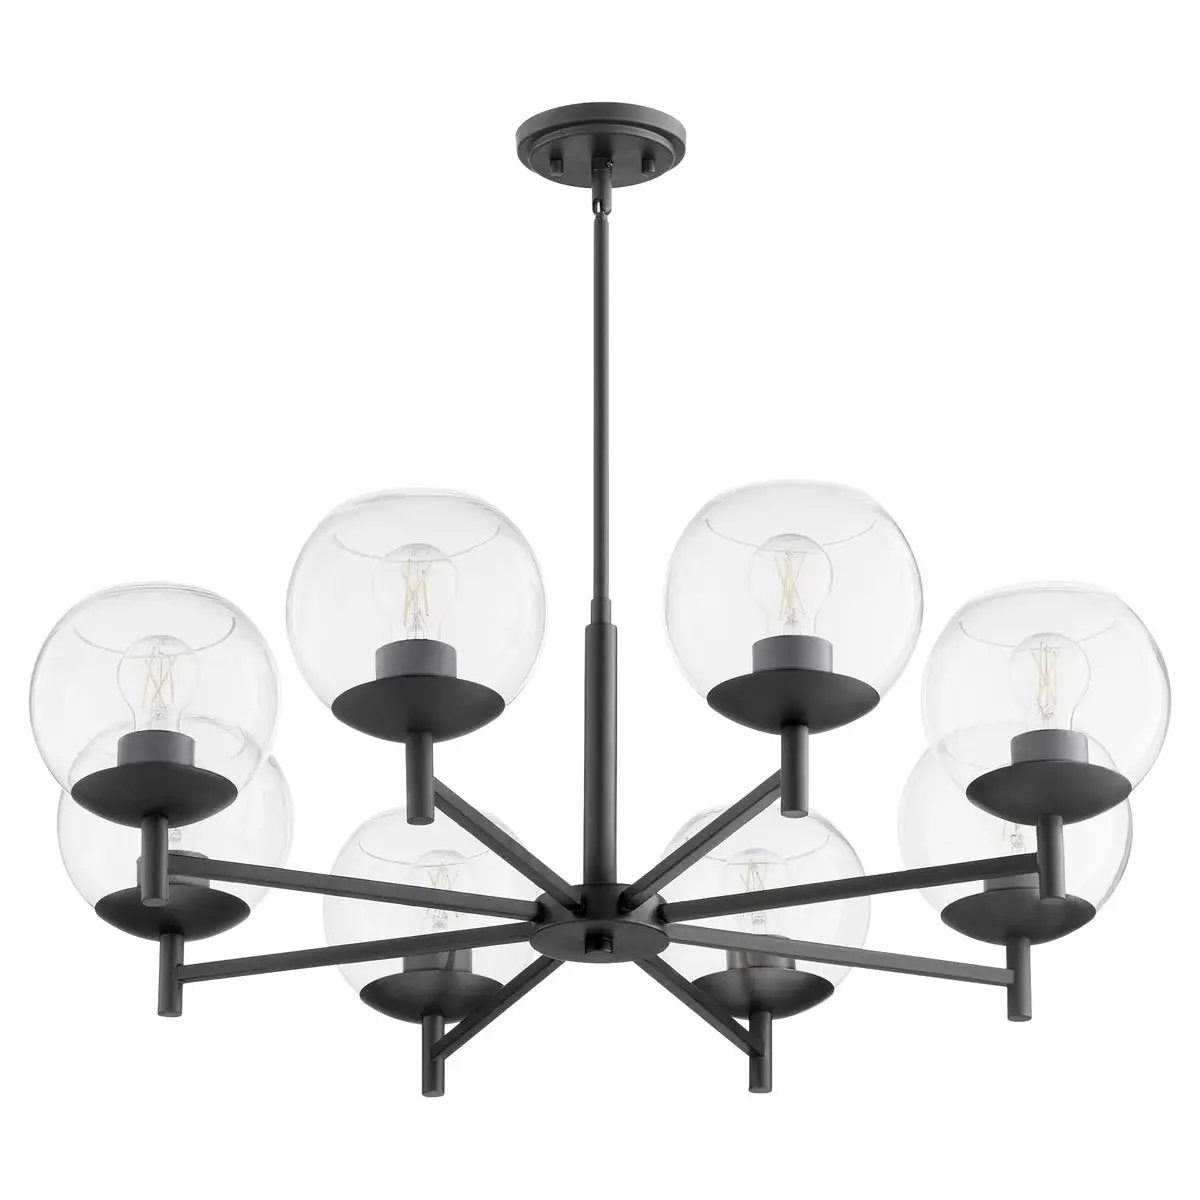 Mid Century Modern Chandelier with clear lights and rounded casings, showcasing subtle, stylized design. Strong angles and bold lines complement rounded profiles. Matte Black finish. Perfect for kitchens, dining rooms, living rooms, or entry foyers. 34&quot;W x 11&quot;H. 8 bulbs, 60W, Medium E26 base. Dimmable. UL Listed. 2-year warranty.